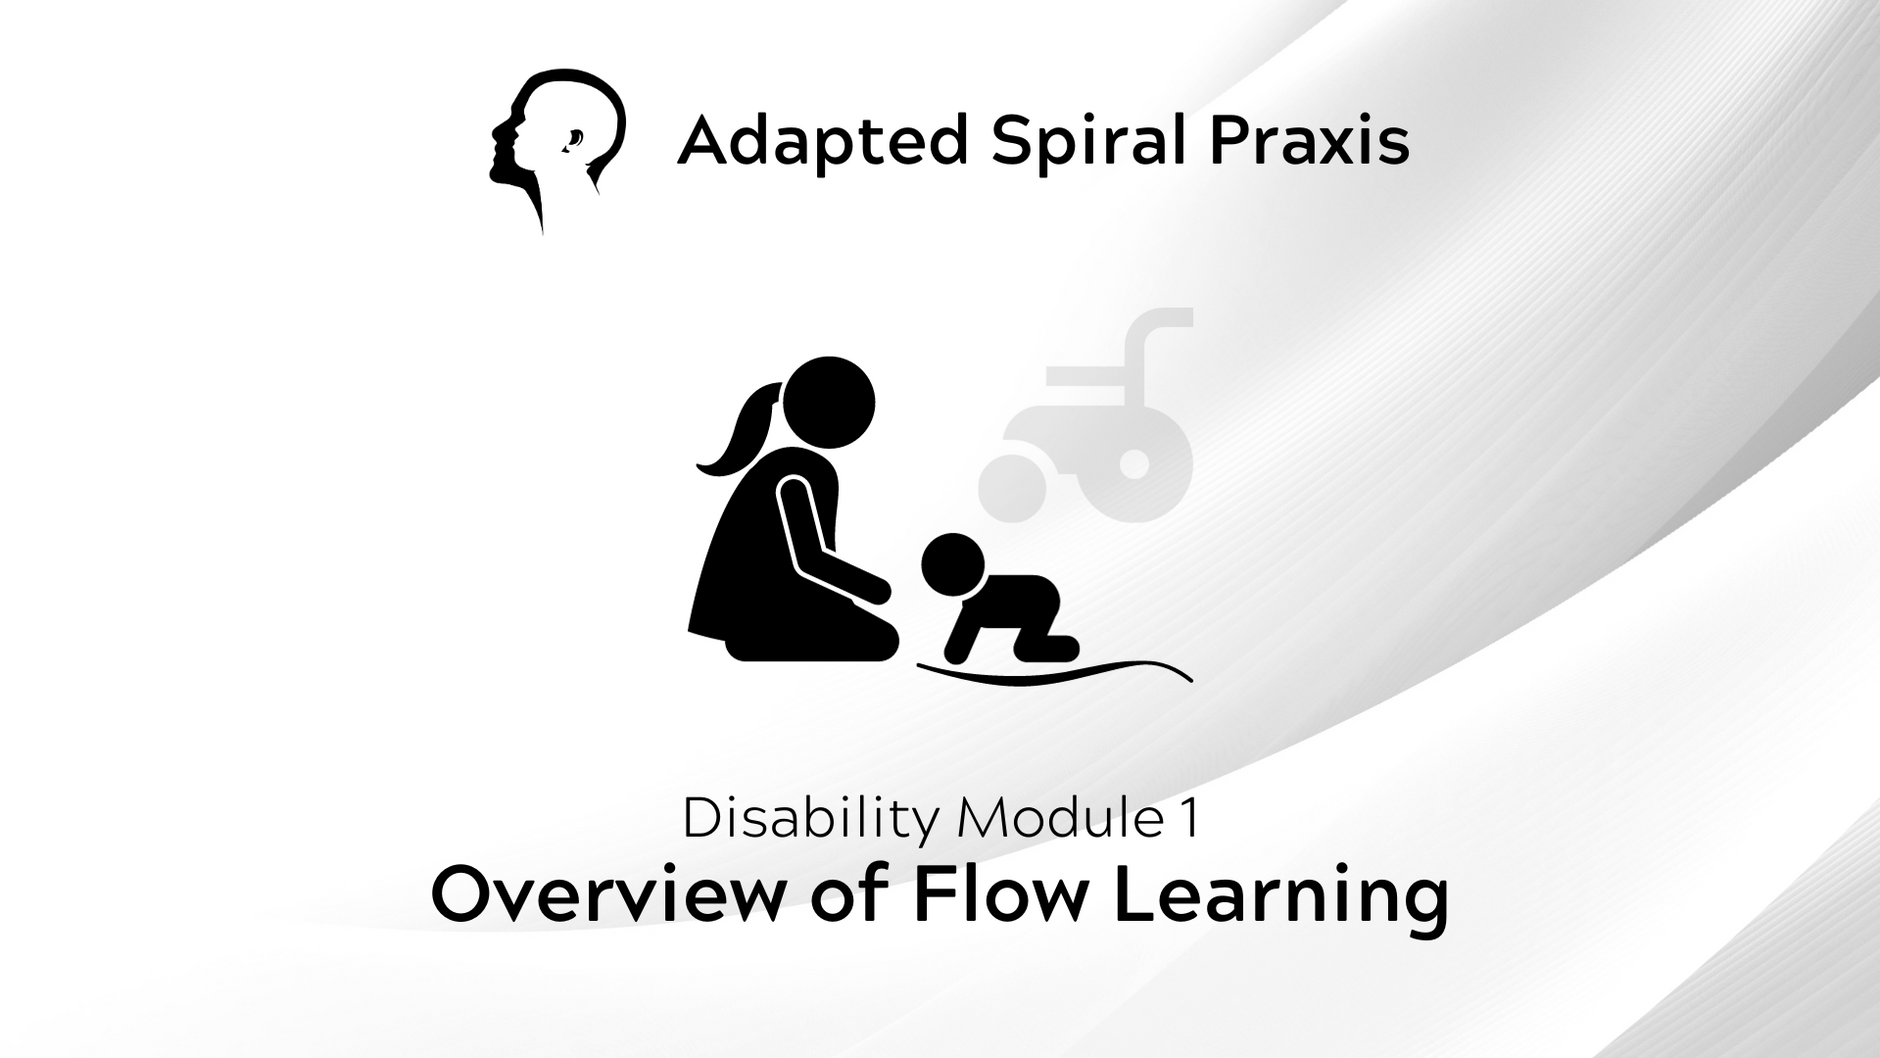 Overview of Flow Learning